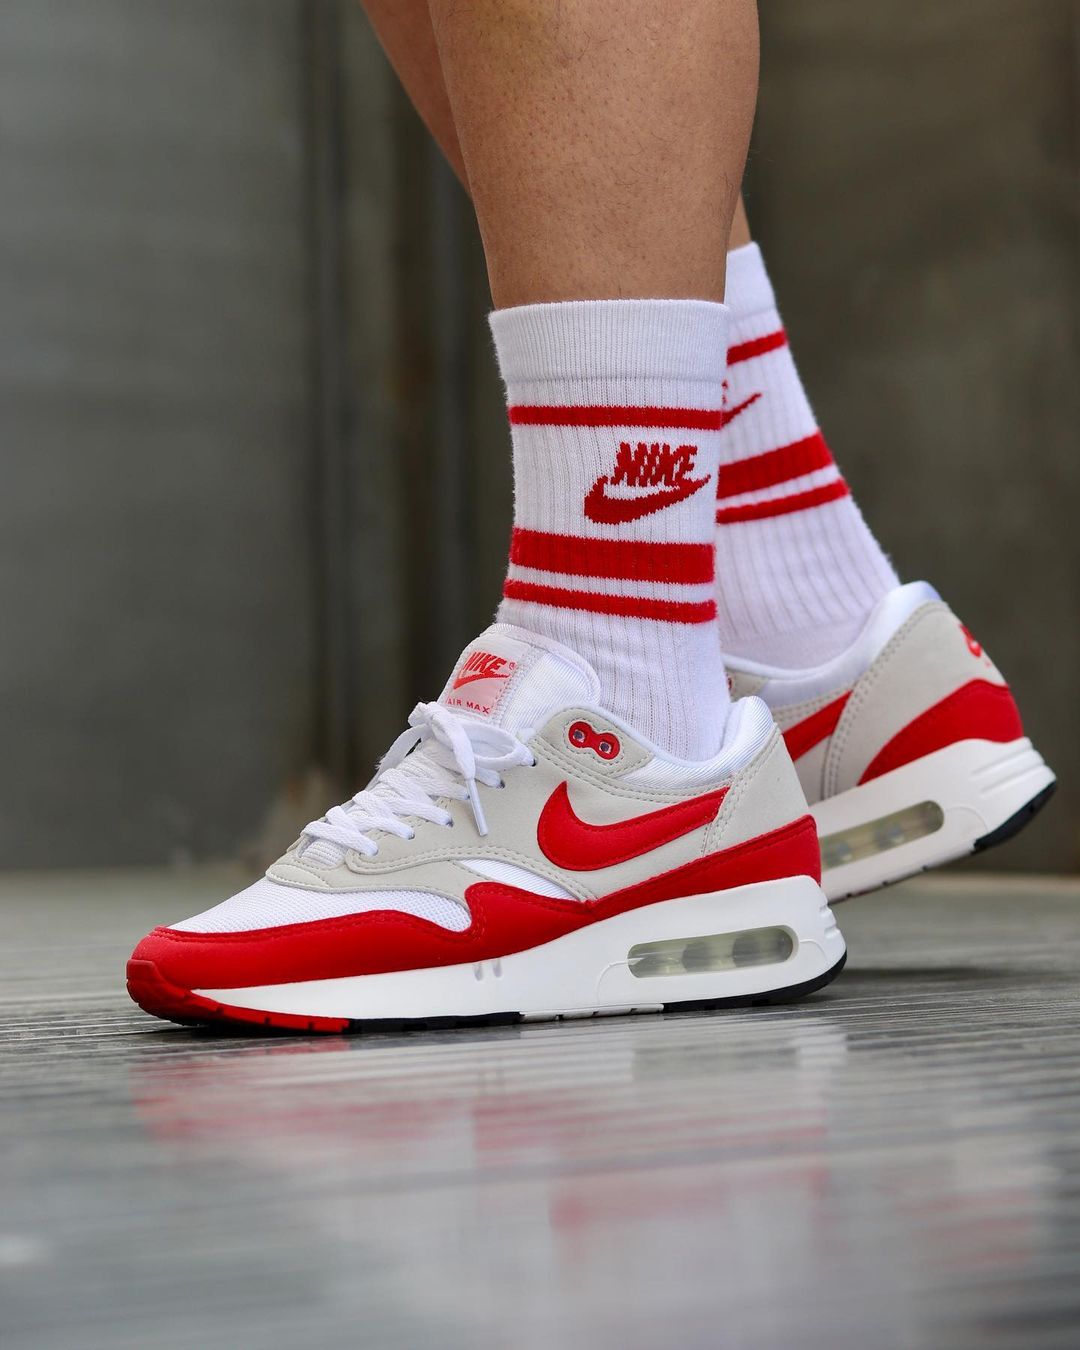 Nike Air Max 1 OG Red Big Bubble @gonzaloo_93